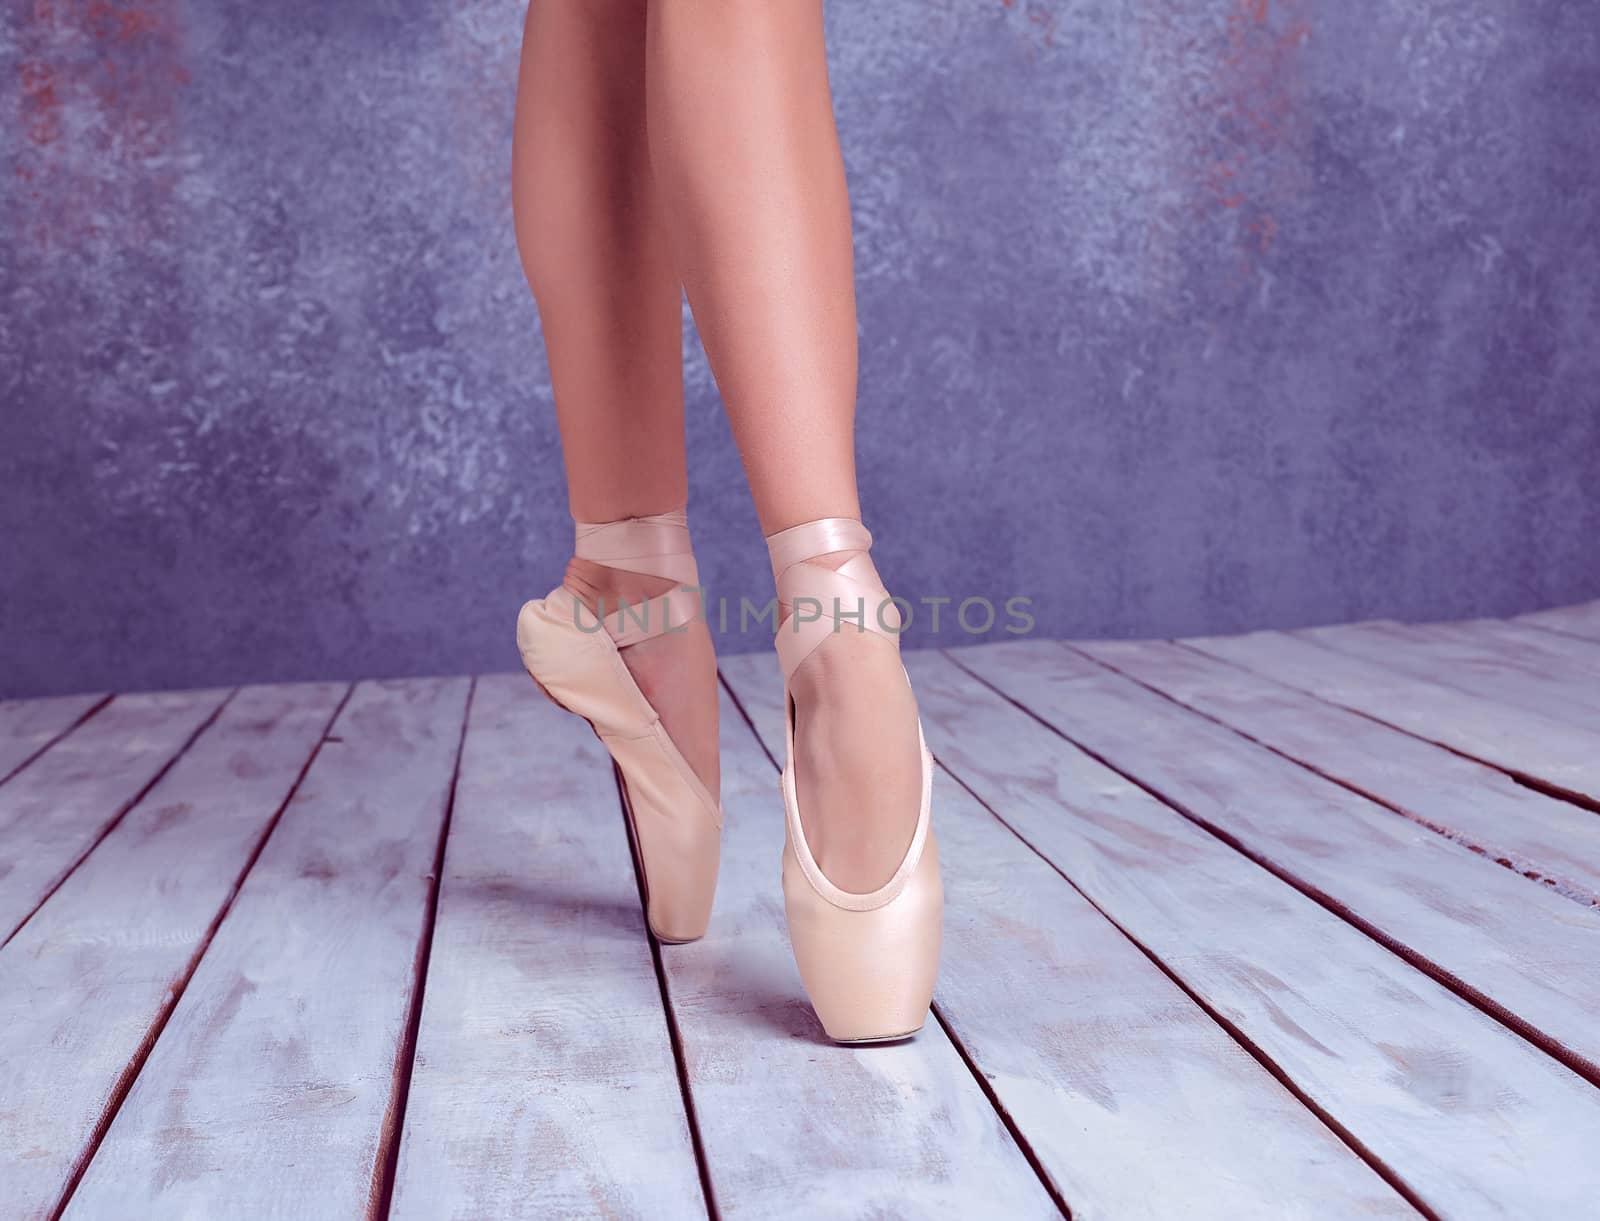 The feet of a young ballerina in pointe shoes  by master1305